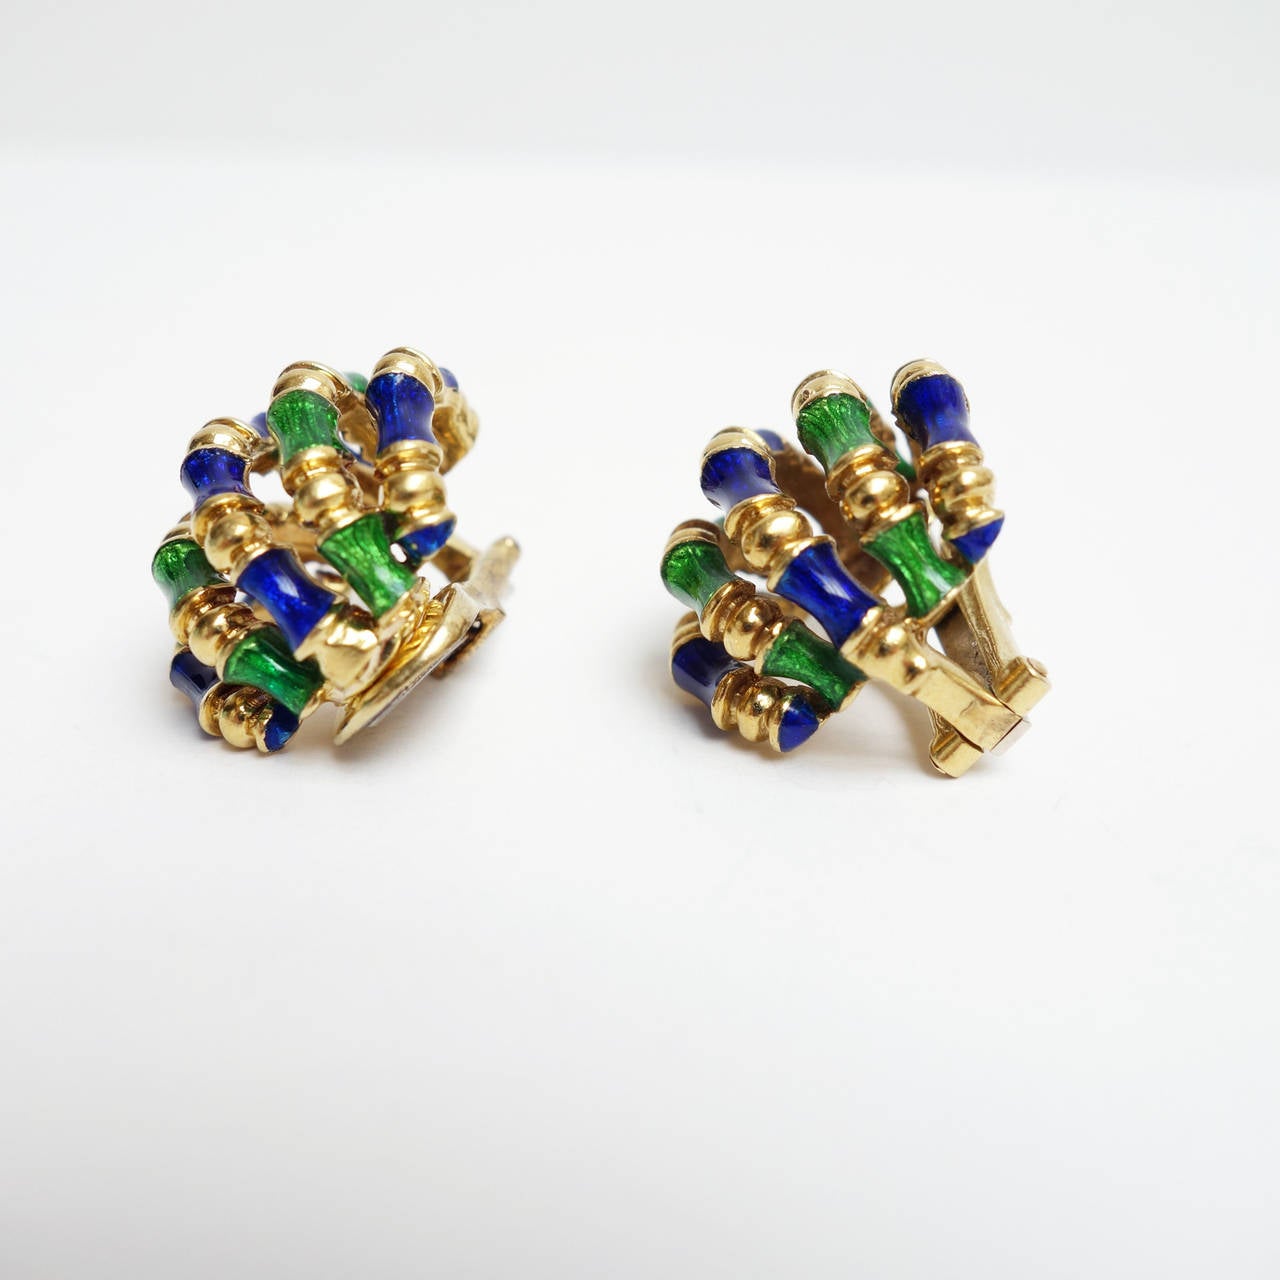 Vintage 1960's Tiffany&Co. 18k yellow gold green and blue enamel clip-on bamboo earrings. Excellent condition. 

Hight: 21mm or 0.81 inches
Width: 21mm or 0.81 inches
Weight: 24.7 grams
Stamped: 18K TIFFANY